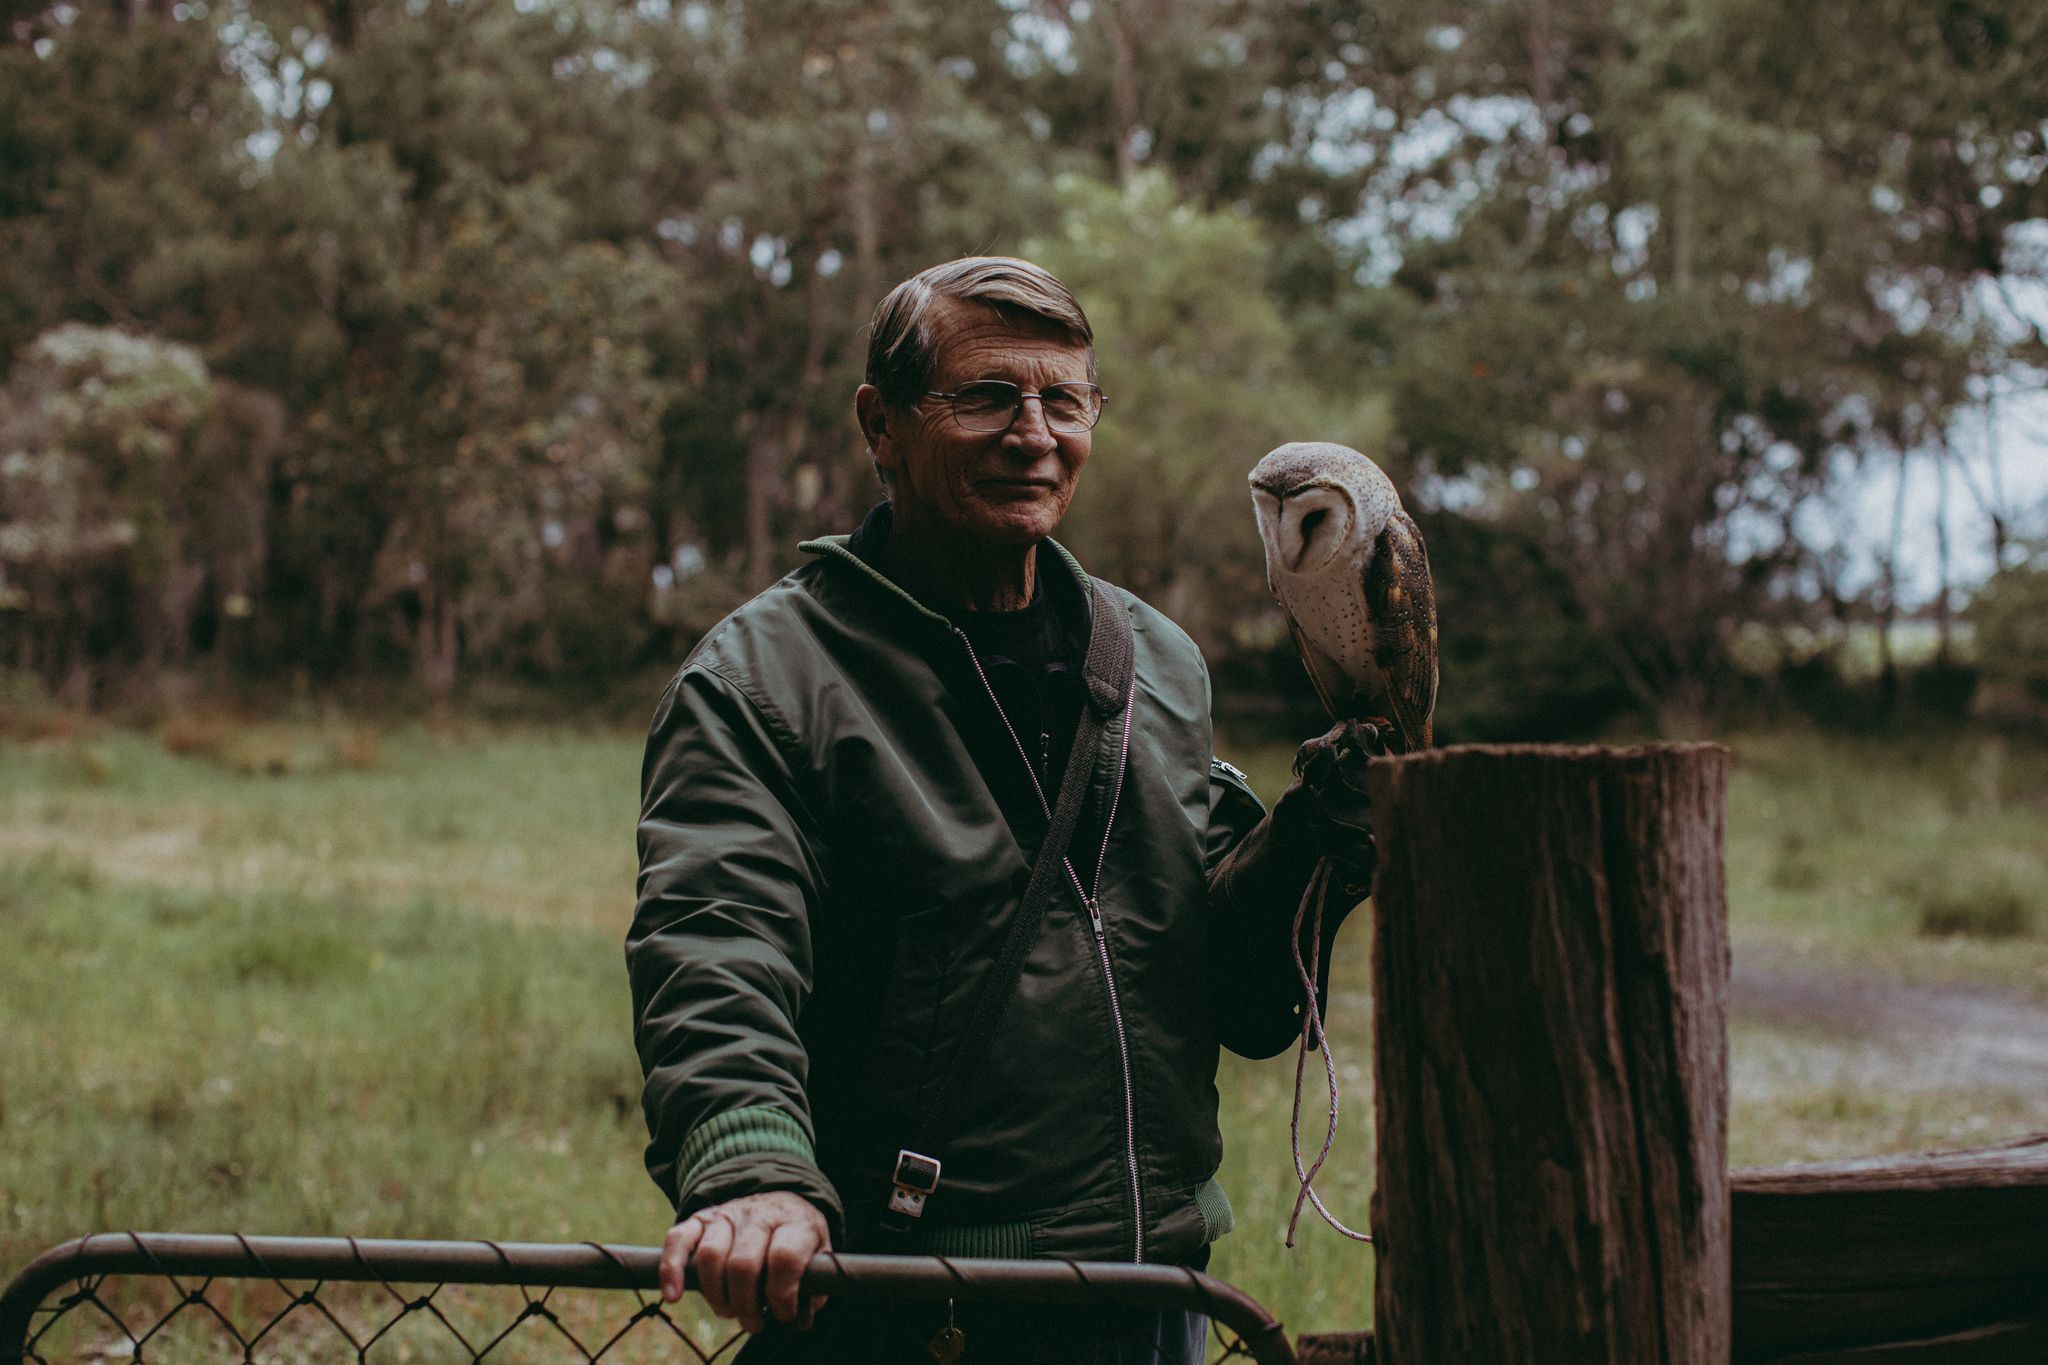 Phil and owl at Eagles Heritage. Photo credit Ryan Murphy